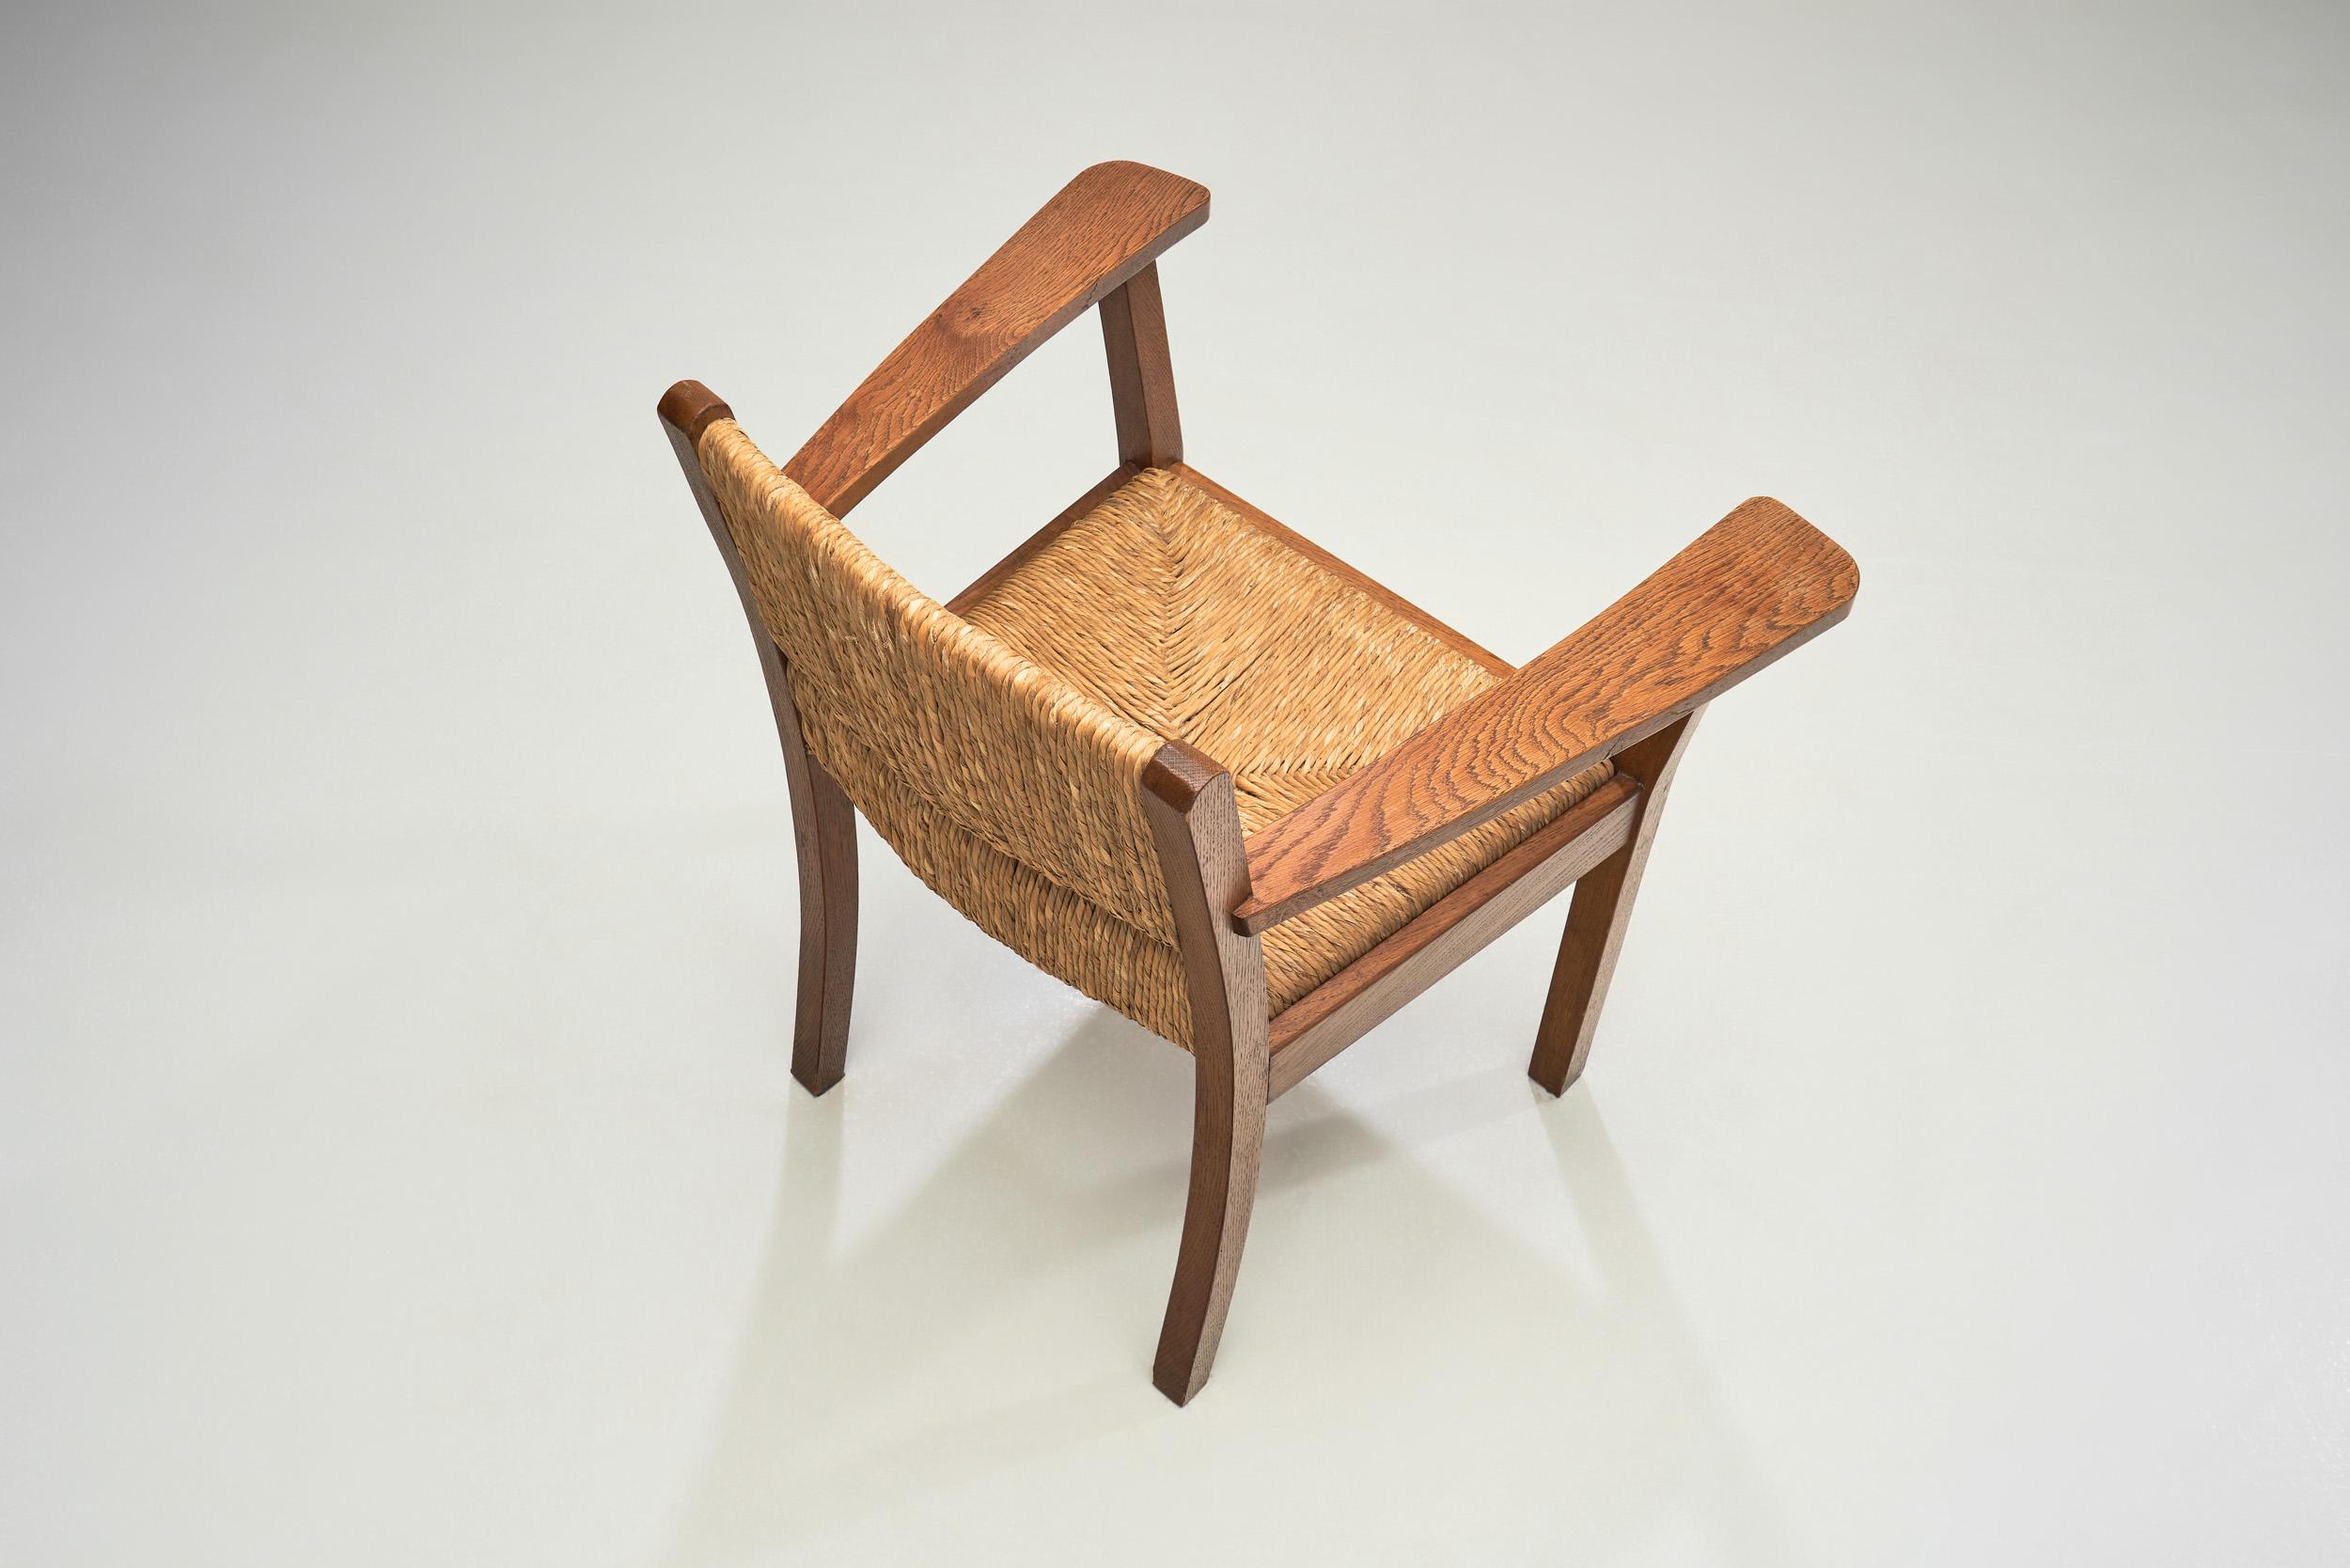 Rush Oak Worpsweder Armchair by Willi Ohler for Erich Schultz, Germany 1920s